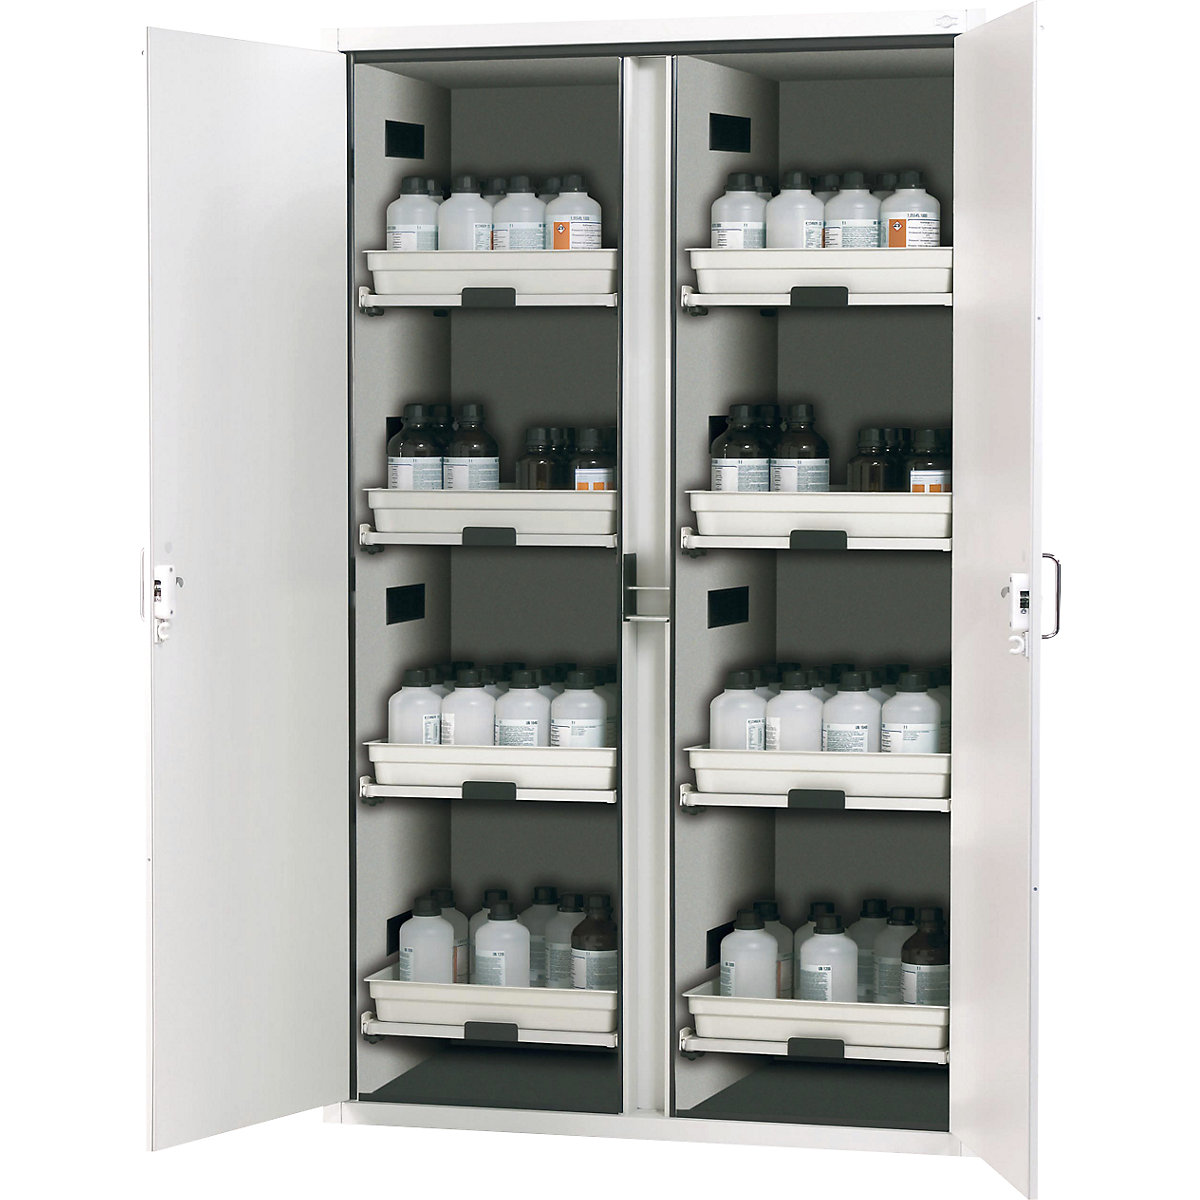 Full height safety cupboard for acids and alkalis – asecos